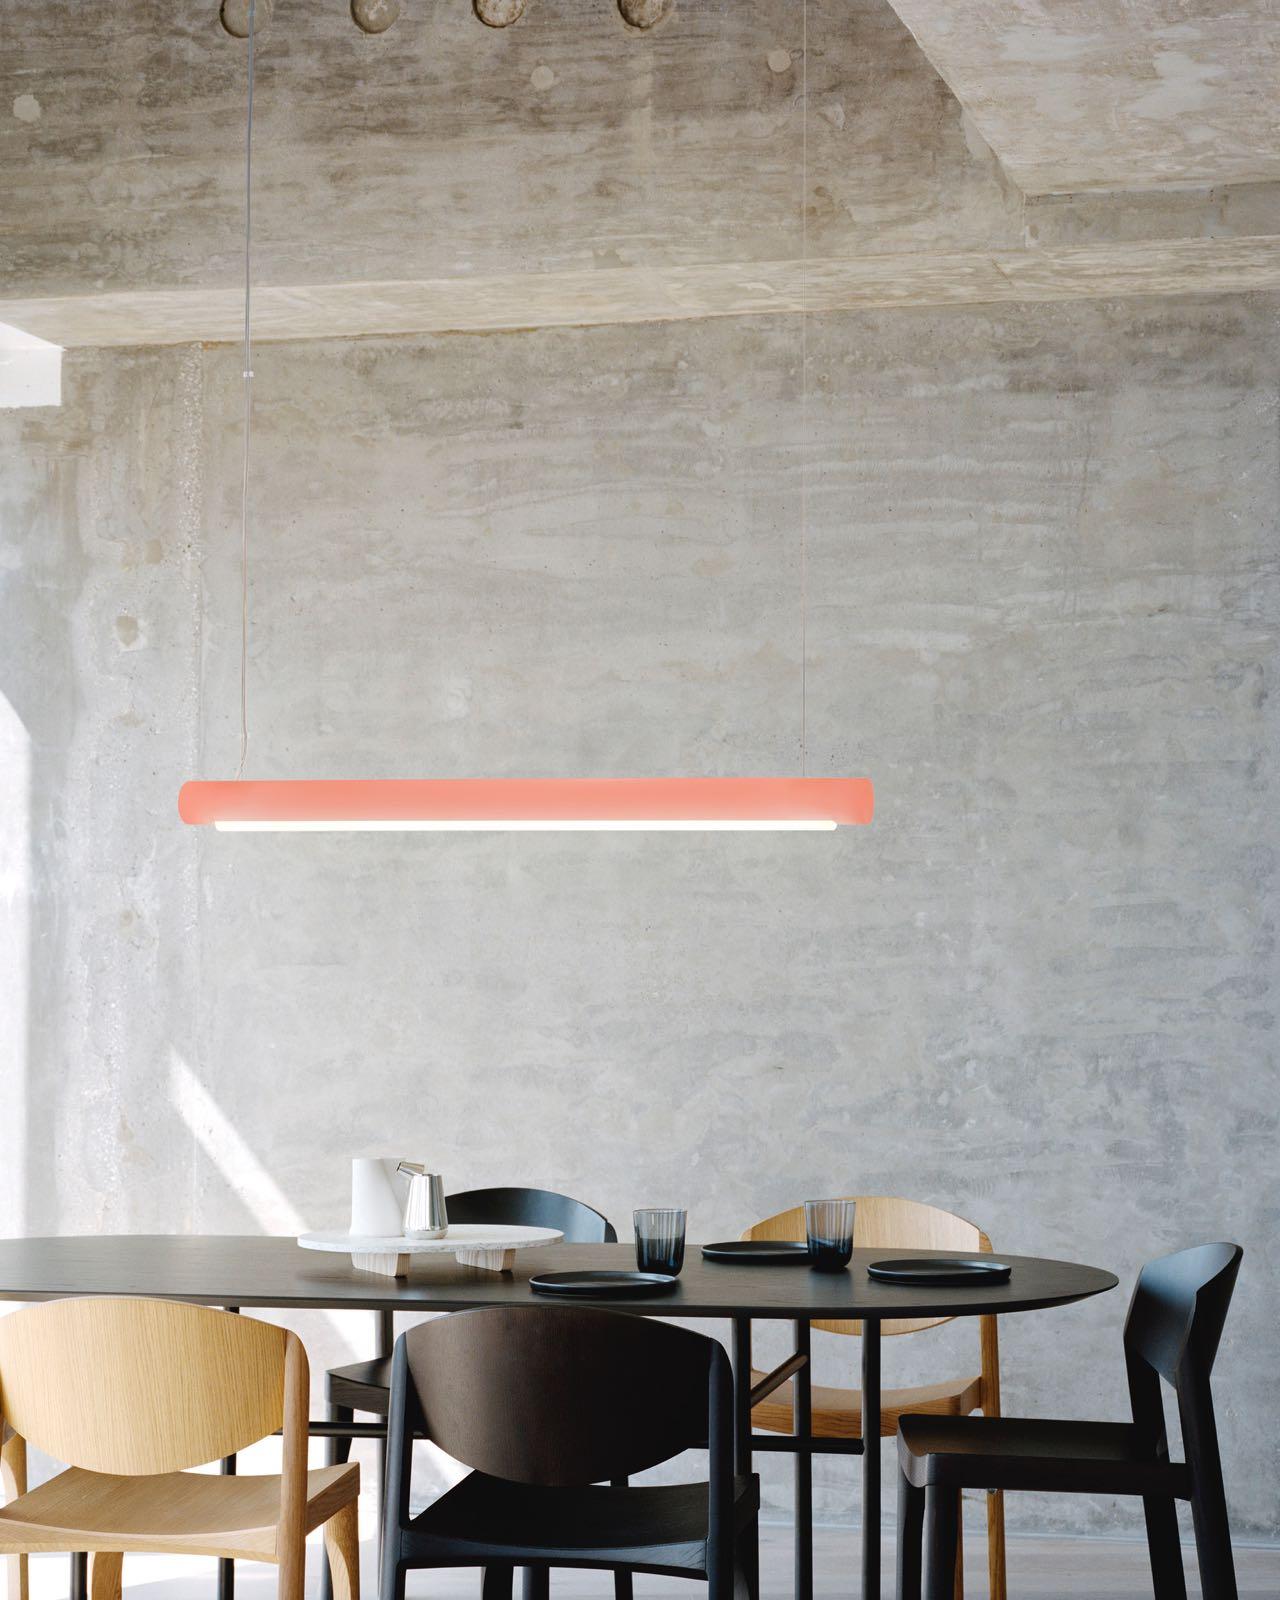 Harnessing Marcelis’ expertise in color, the suspended cylinder bar of the Aura Light can stand alone or work as part of a grouping. Over a metre in length, the design is made from a bio-epoxy resin, created using by-products from farming.
A